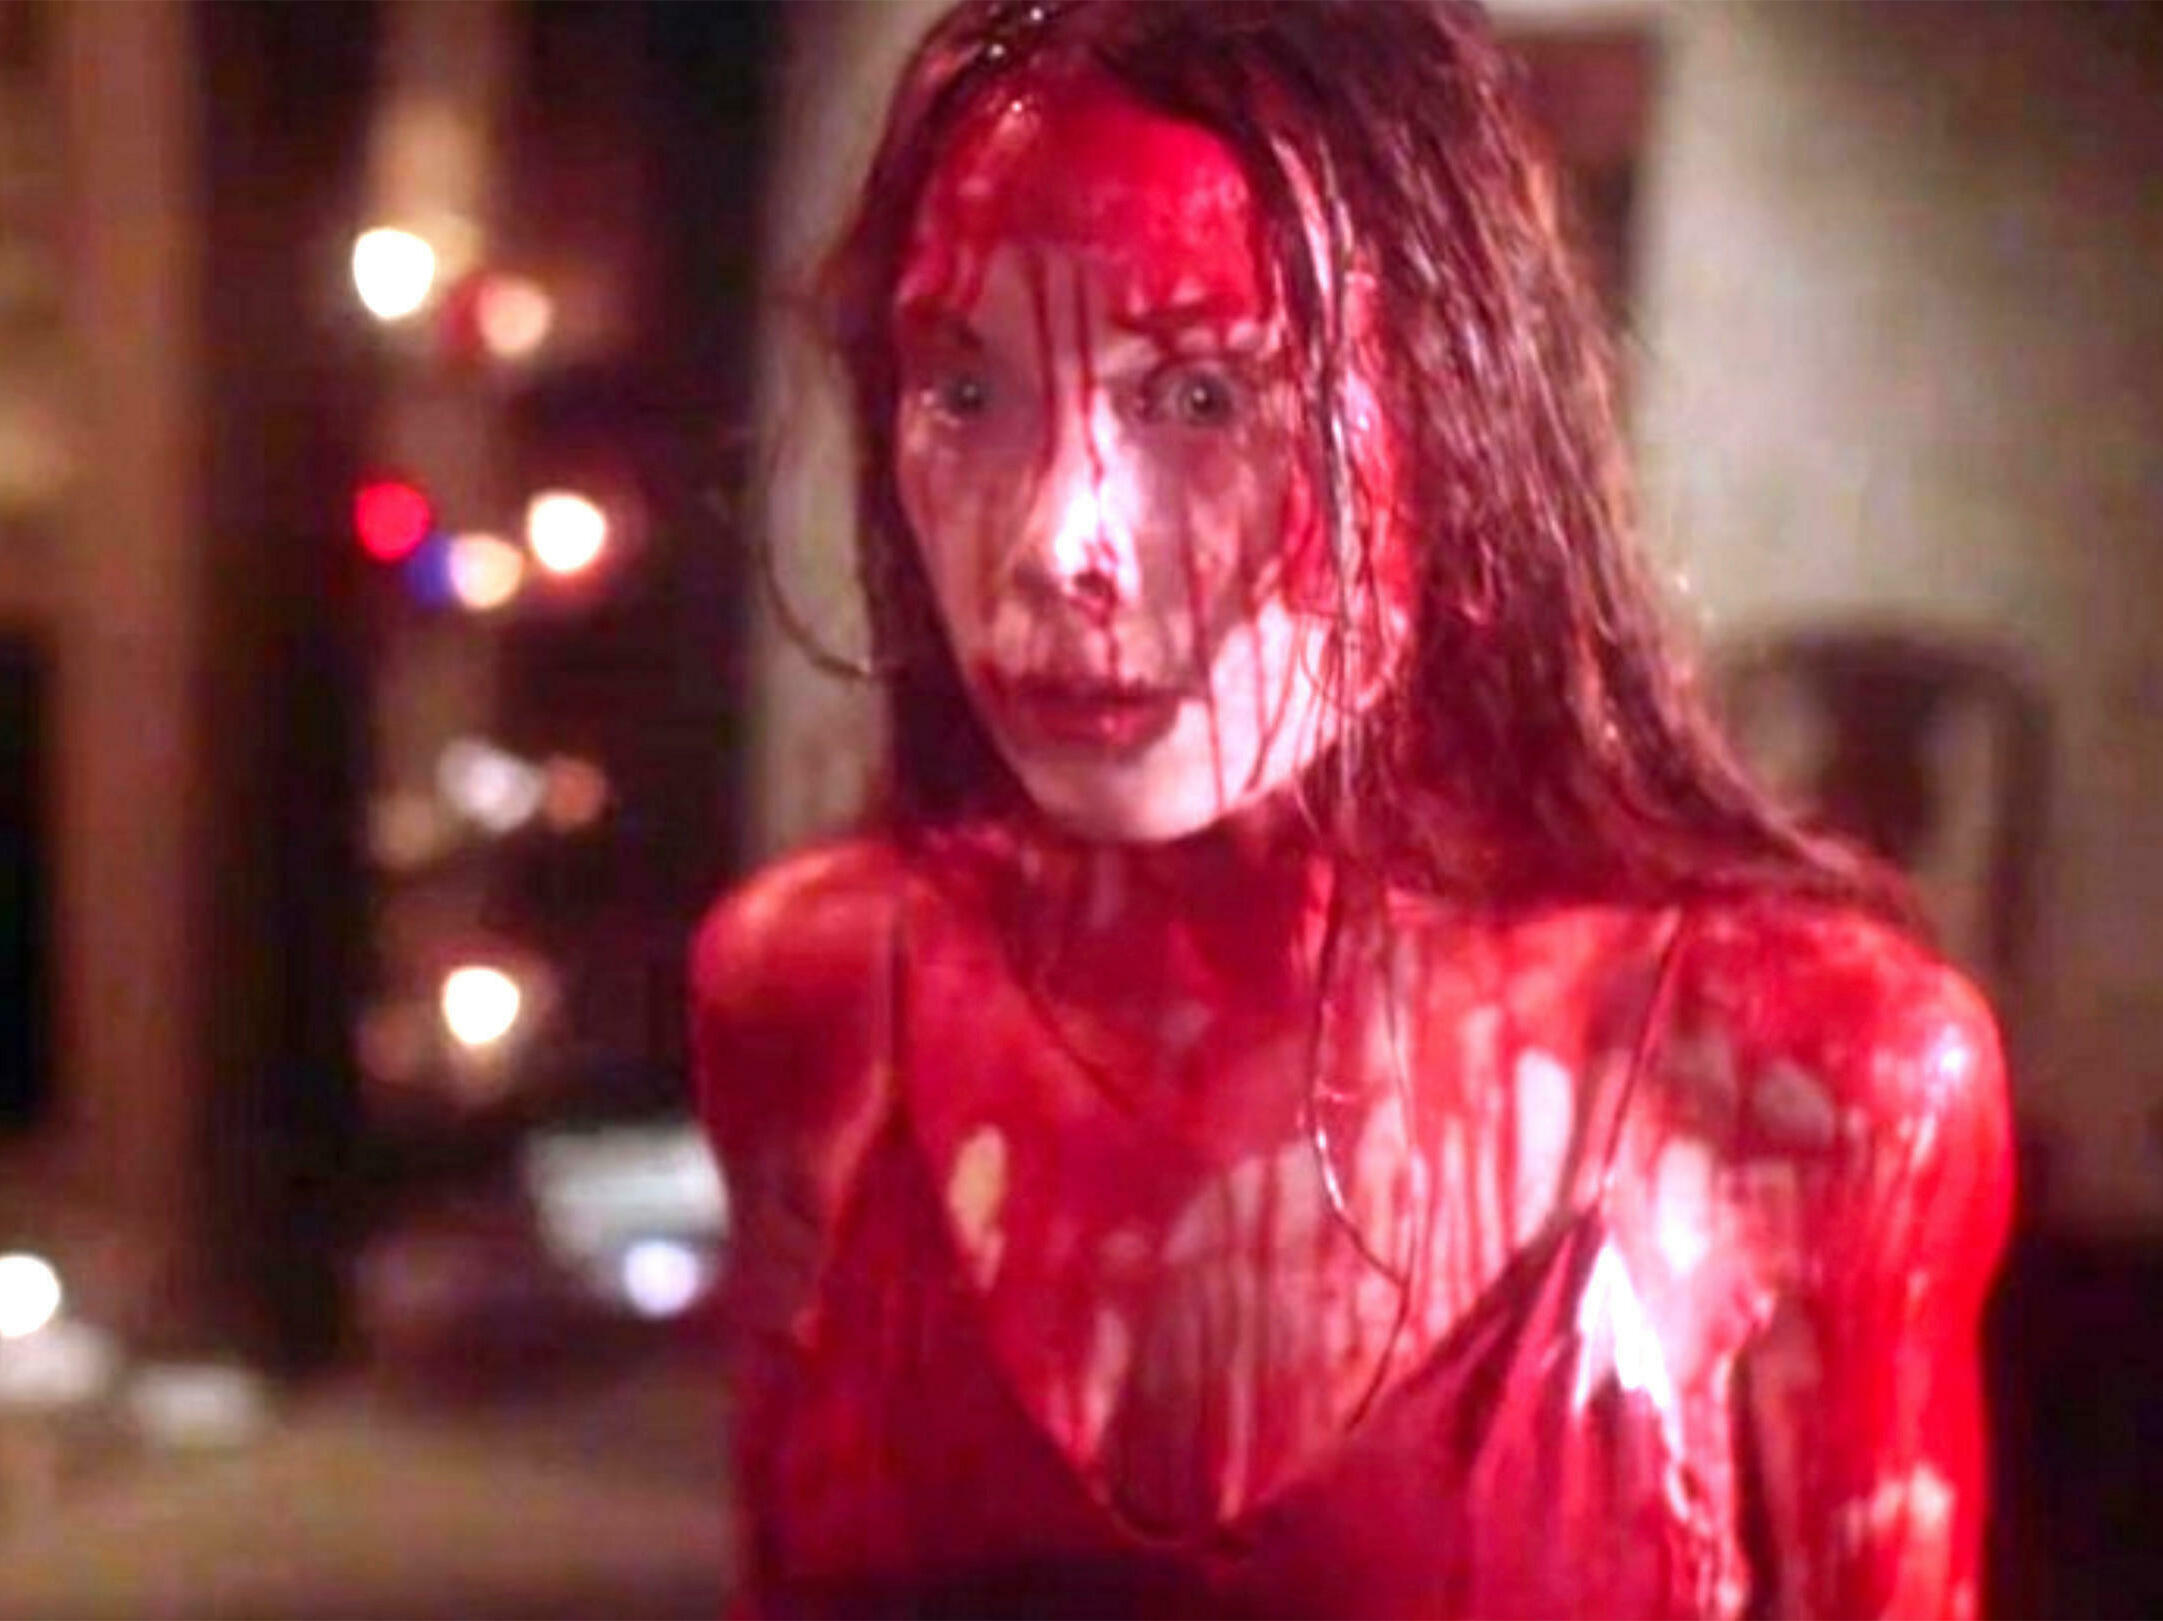 Stephen King's first novel, Carrie, turns 50 years old on Friday, and in honor of her birthday we asked you to share your favorite King stories with us. Above, Sissy Spacek stars in the 1976 film adaptation.